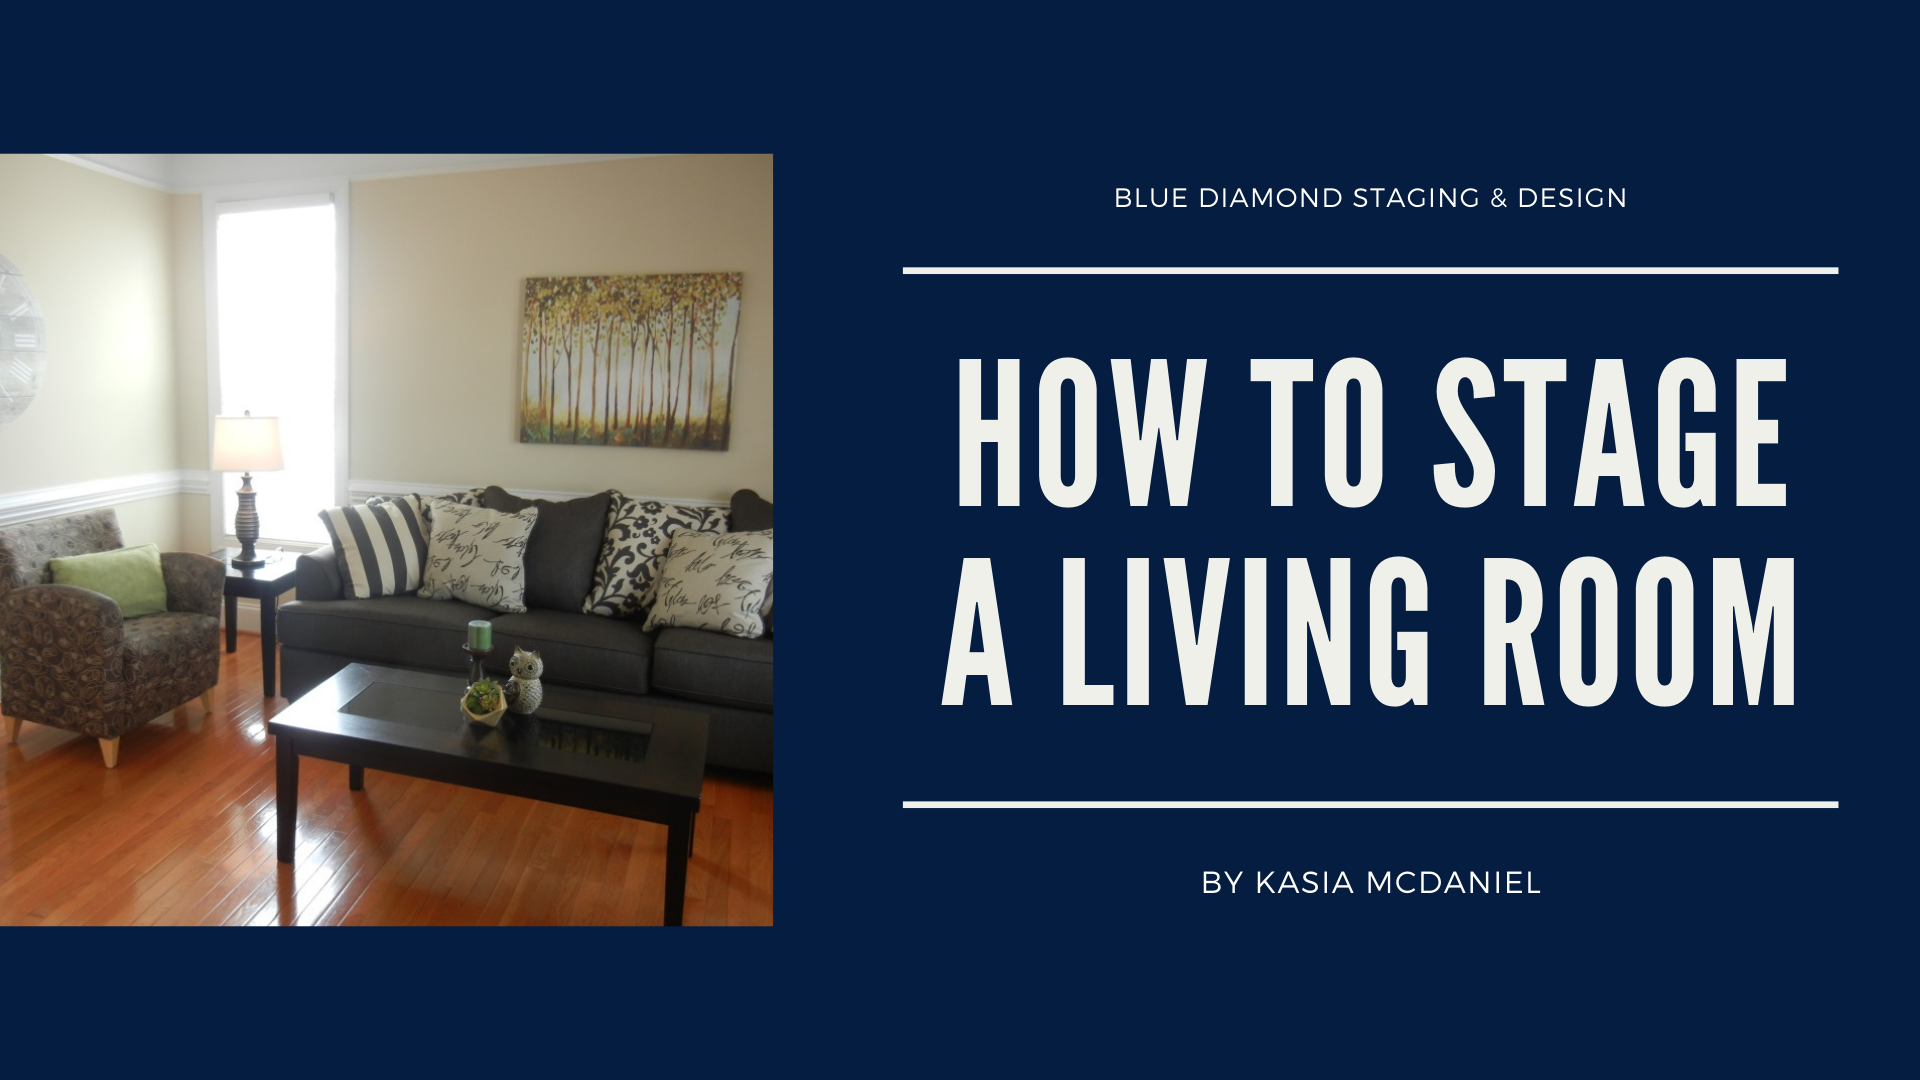 How to Stage a Living Room Course